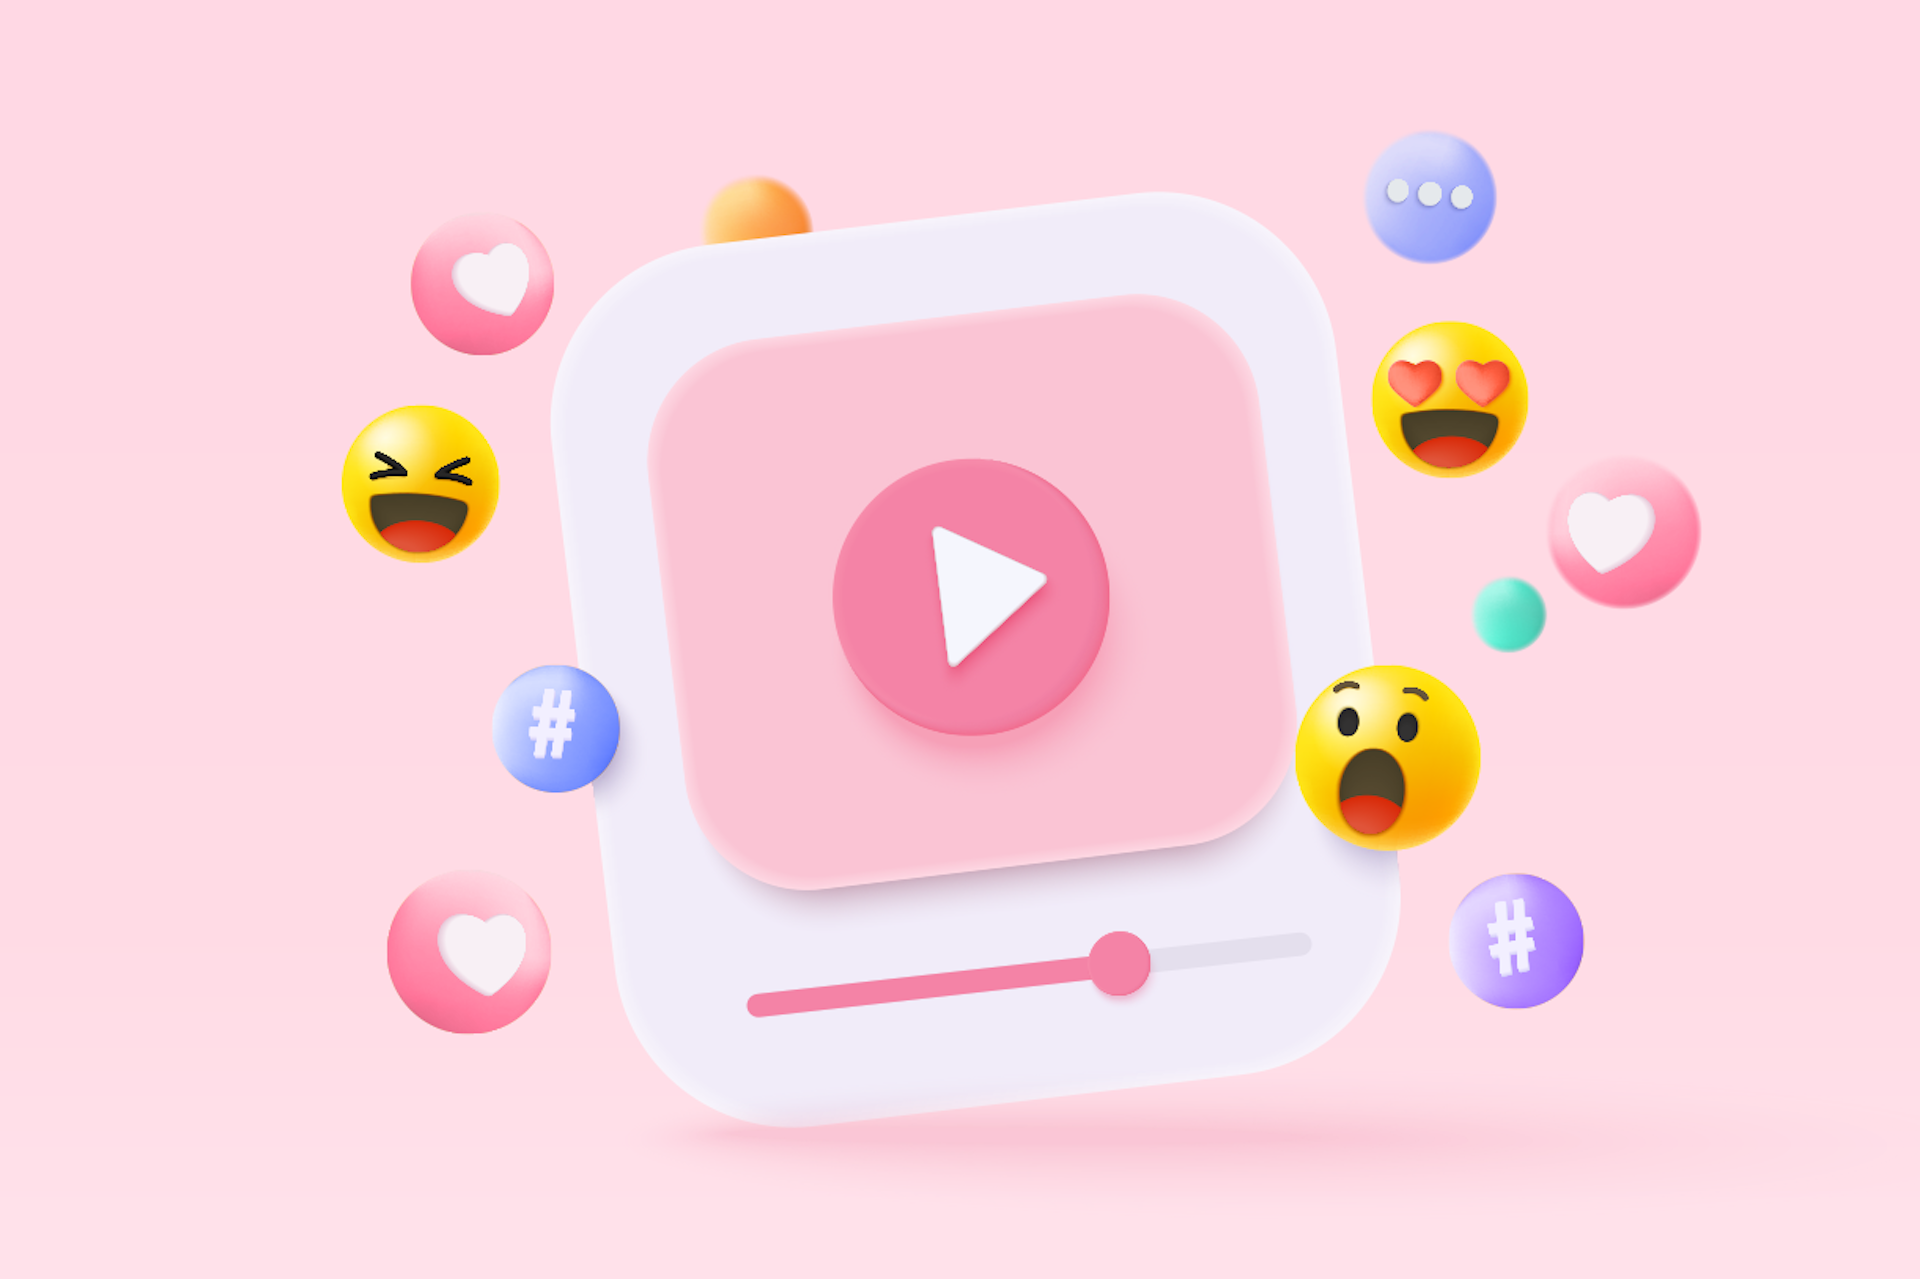 Large pink video play button surrounded by different emoji expressions, like and hashtag symbols. Best social media marketing examples blog post